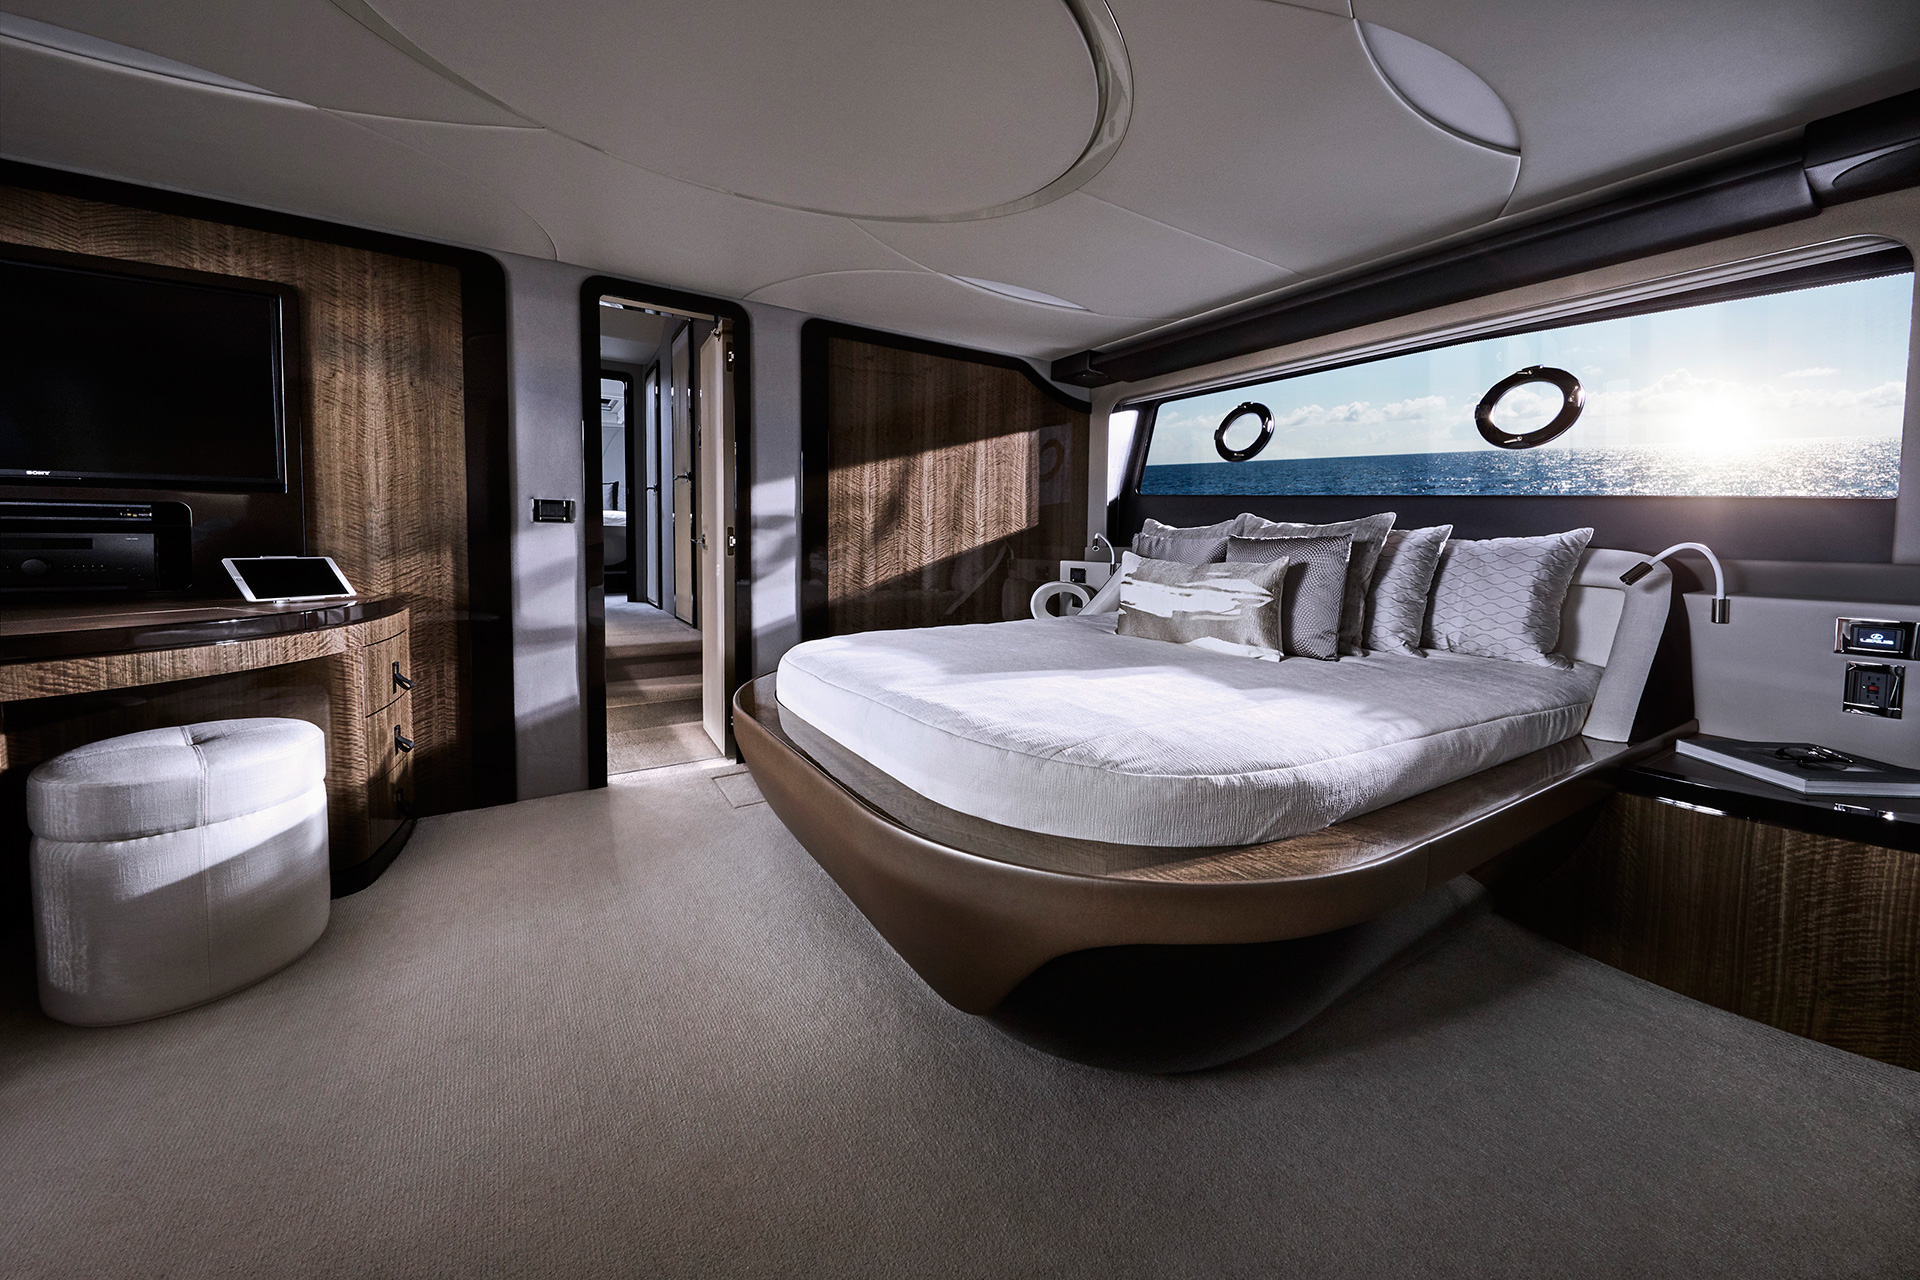 A view of a bedroom inside the Lexus LY 680 yacht.